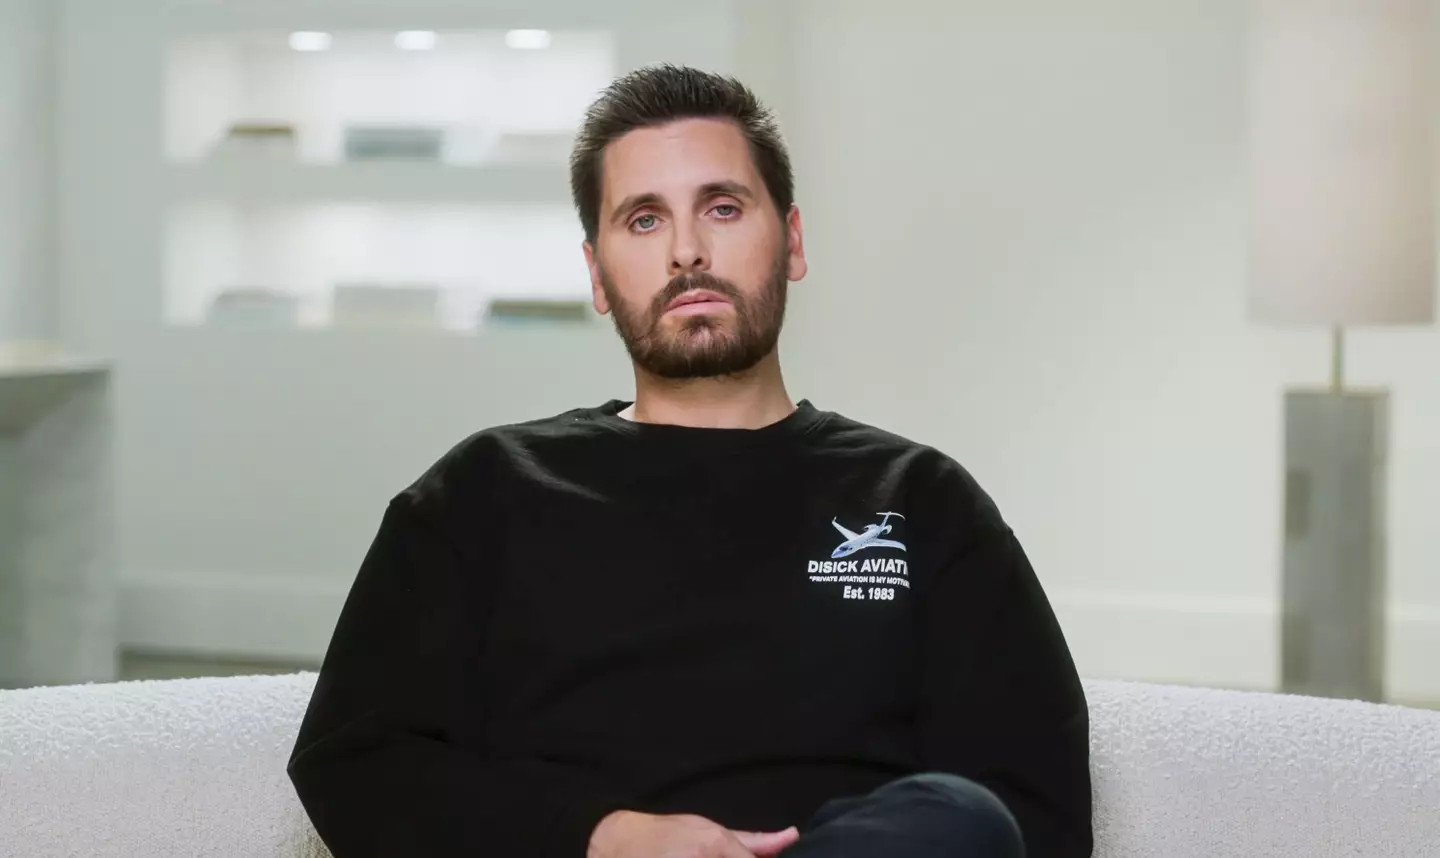 Scott Disick rose to fame on Keeping up with the Kardashians.